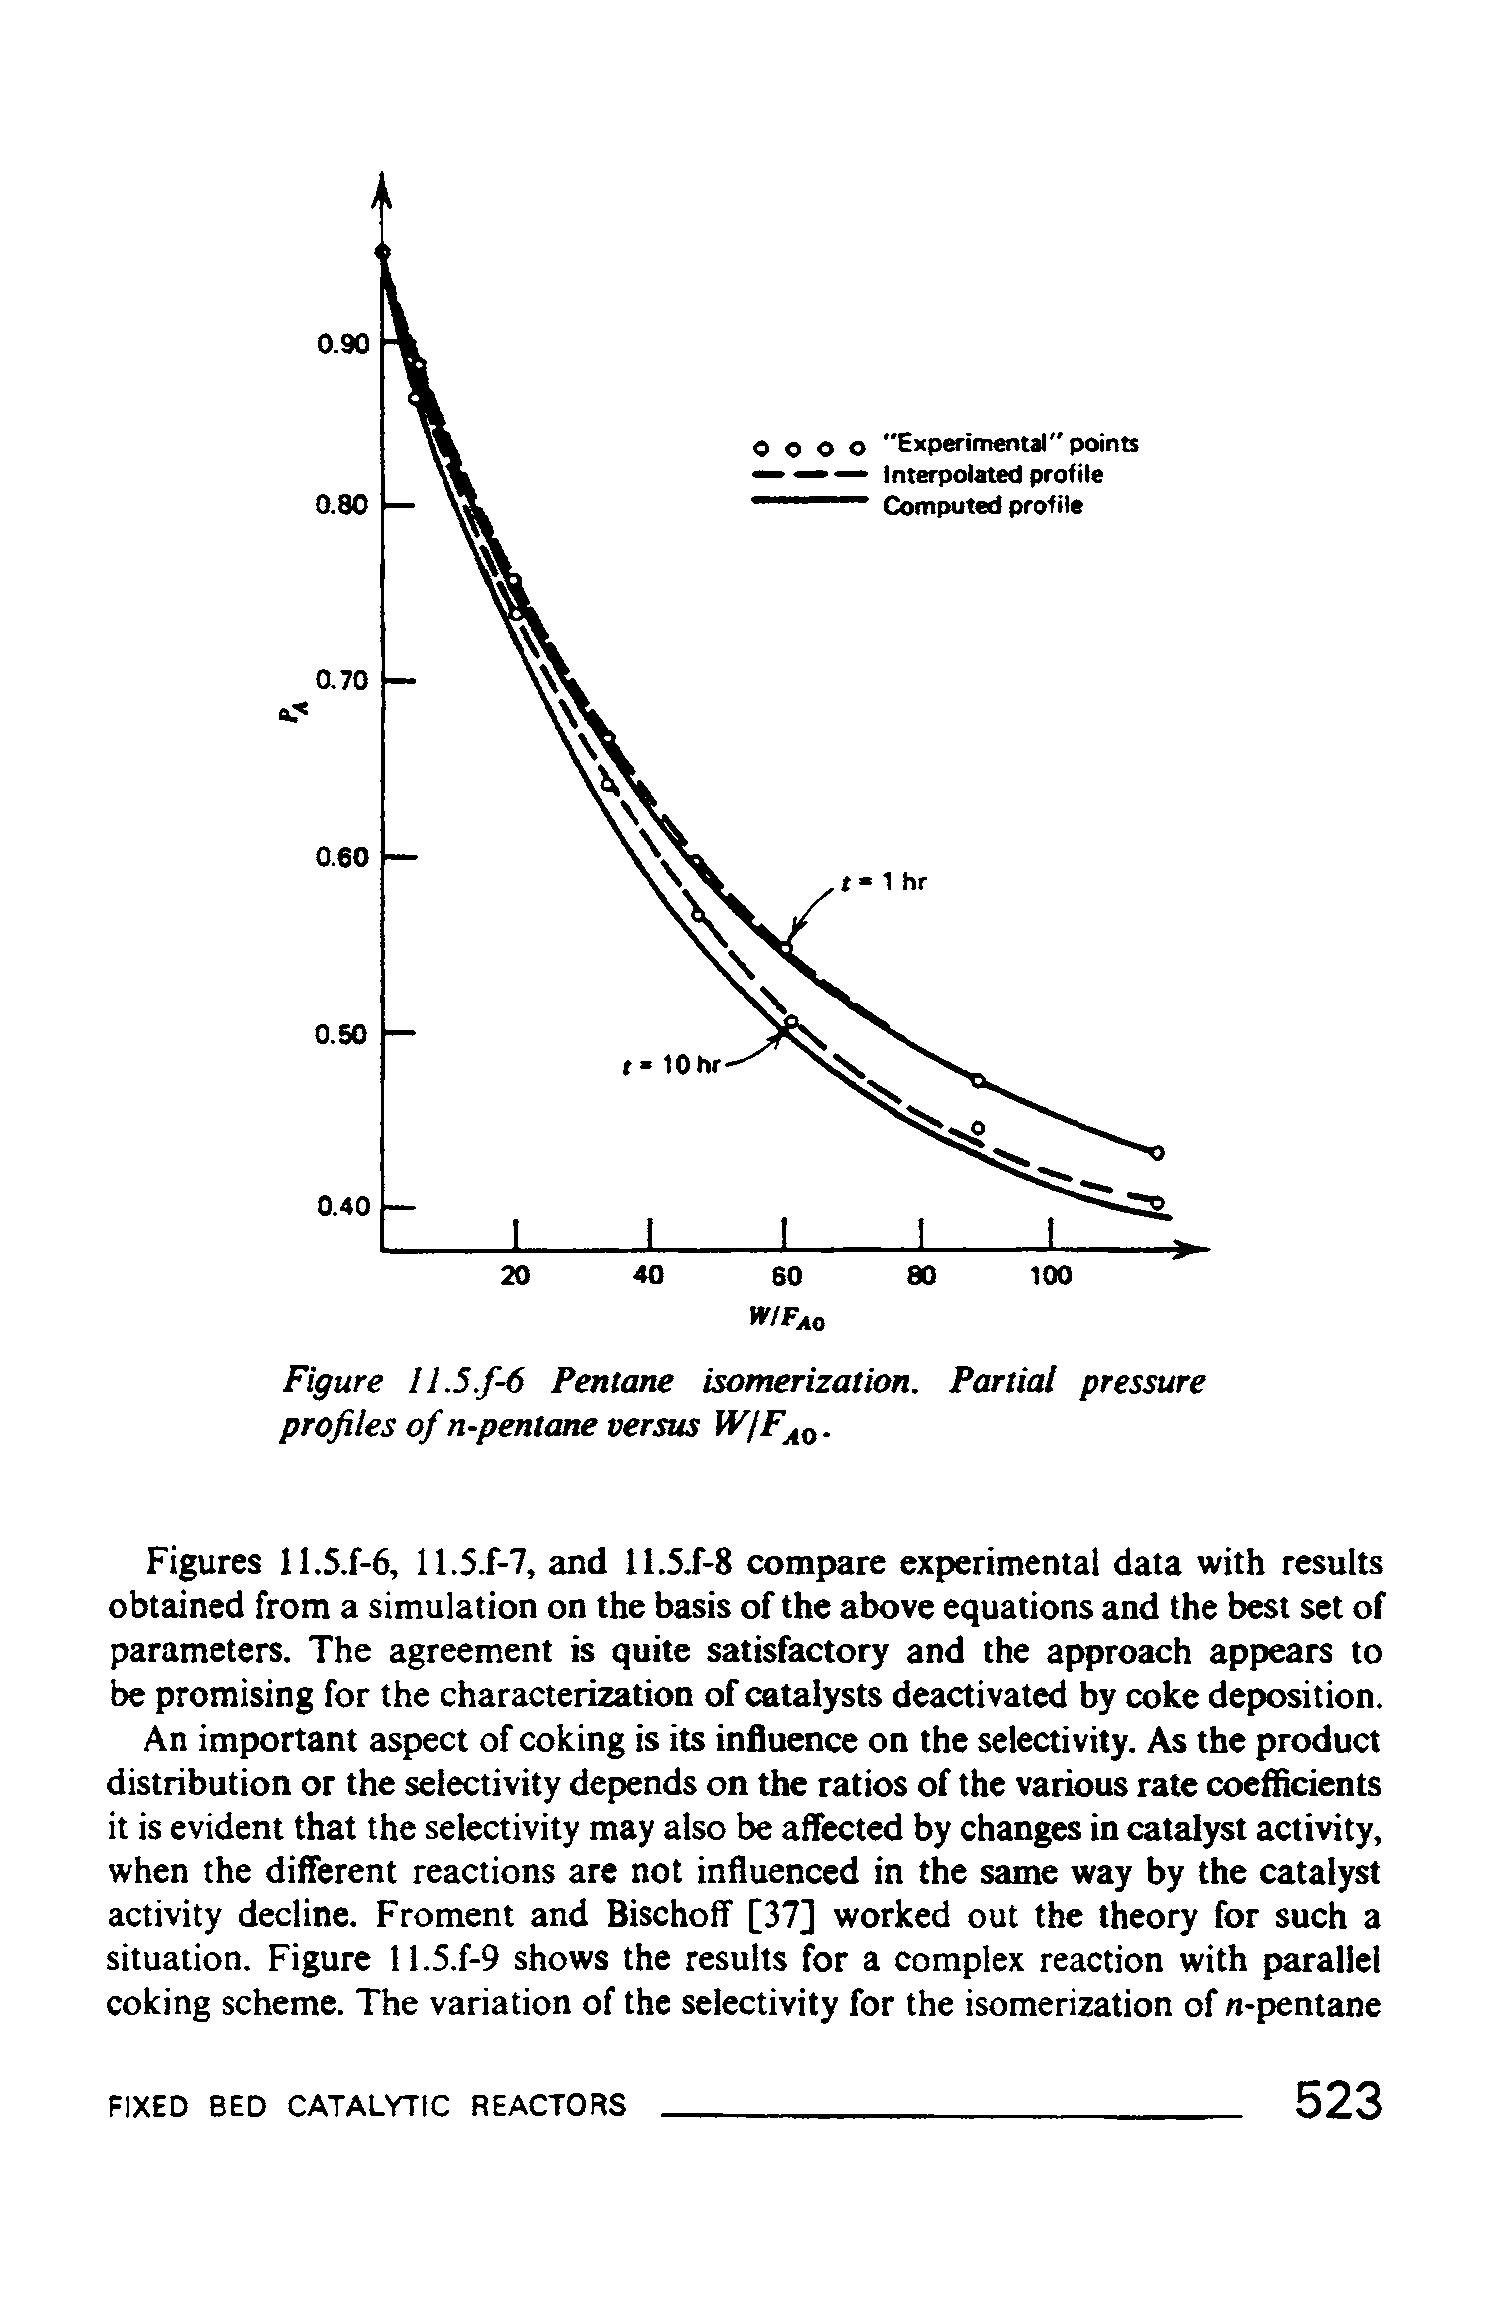 Figures lI.S.f-6, 11.5i"-7, and ll-SJ-S compare experimental data with results obtained from a simulation on the basis of the above equations and the best set of parameters. The agreement is quite satisfactory and the approach appears to be promising for the characterization of catalysts deactivated by coke deposition.